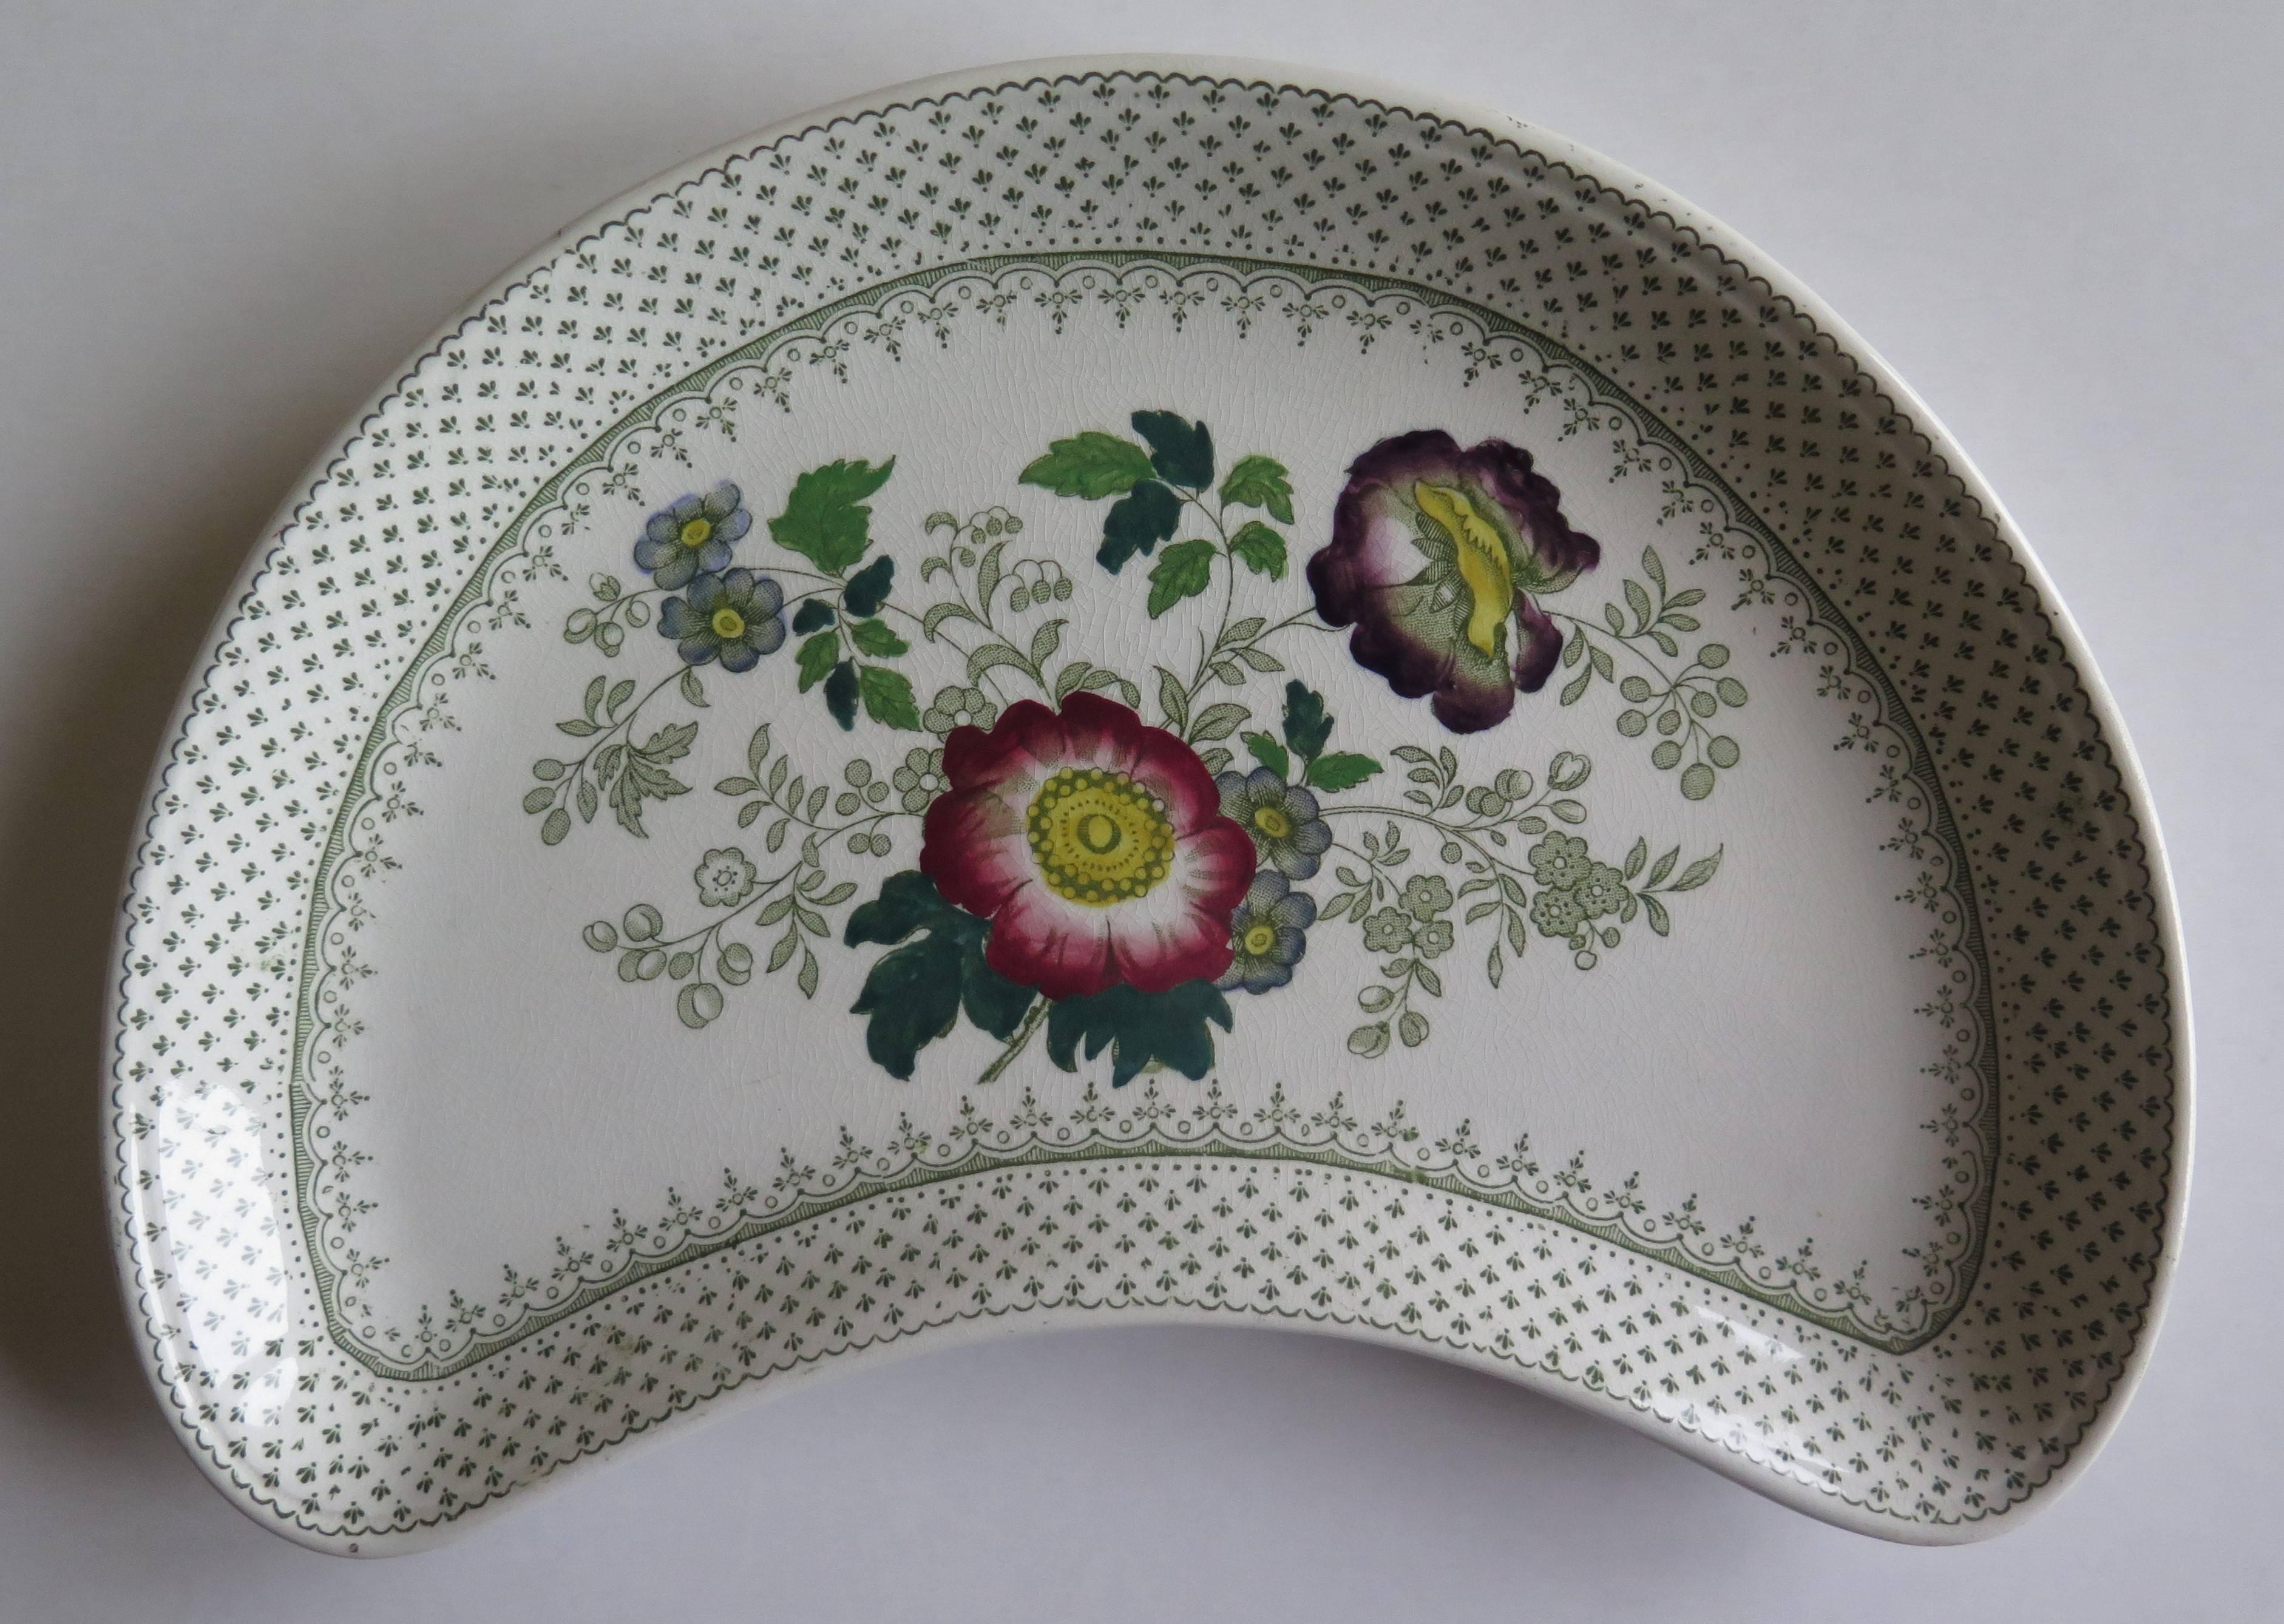 These are a good and unusual set of four ironstone supper dishes from the Mason's Factory when it was owned by the Ashworth Brothers. From about 1861 the Mason's Company traded under the name of George L. Ashworth then as George L Ashworth and Bros.